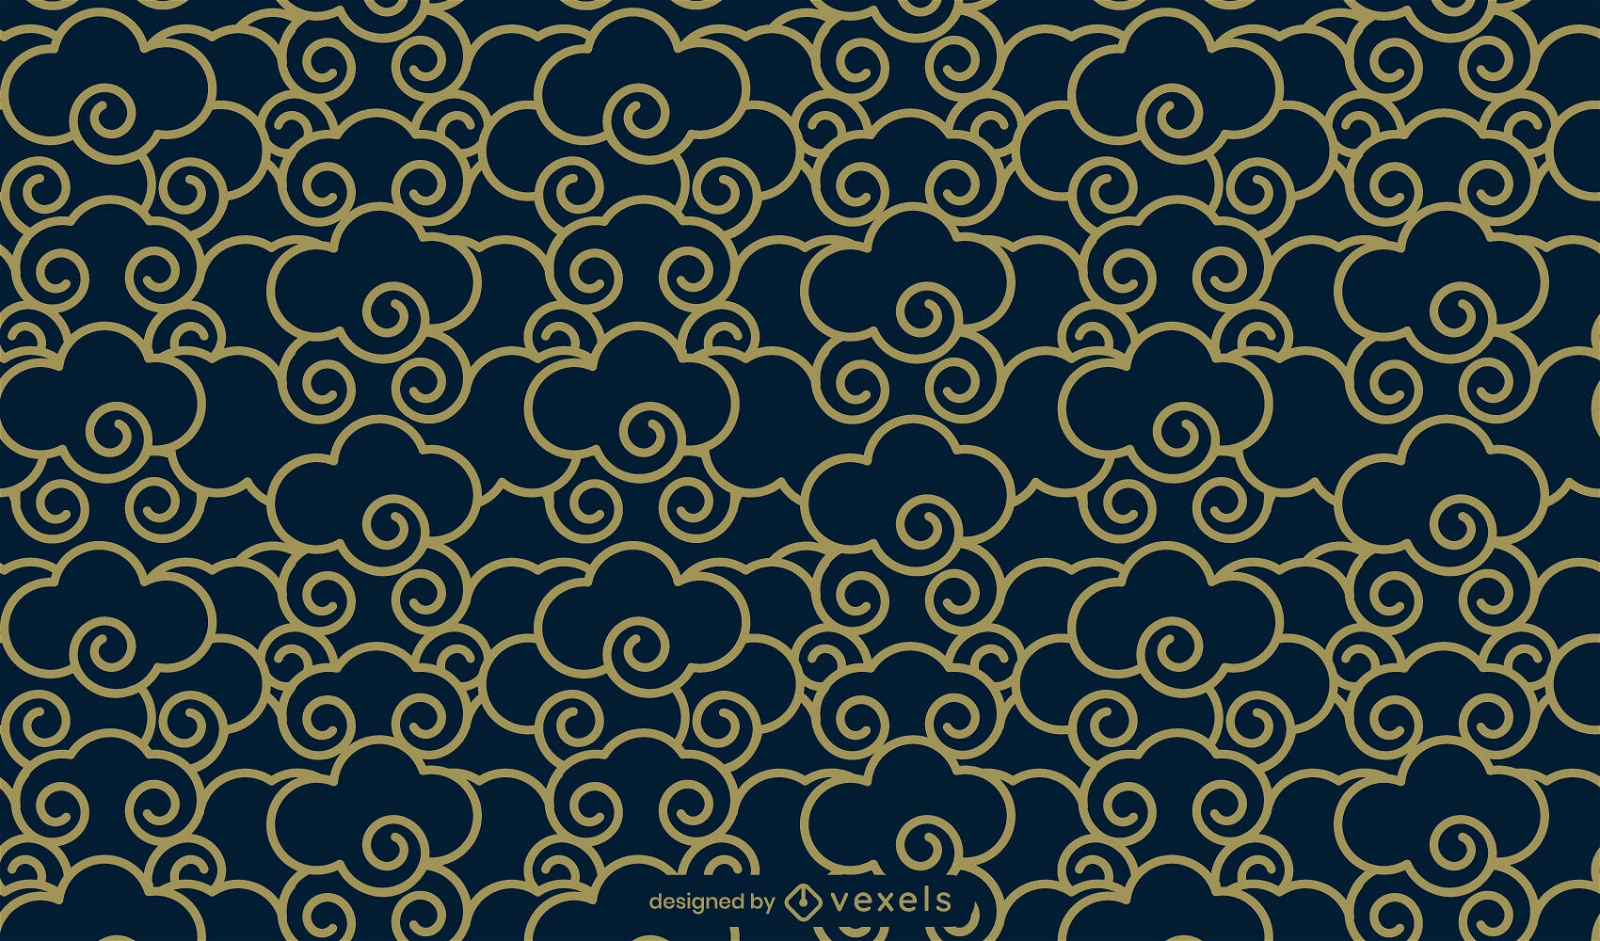 Japanese Cloud Pattern PNG Images For Free Download - Pngtree